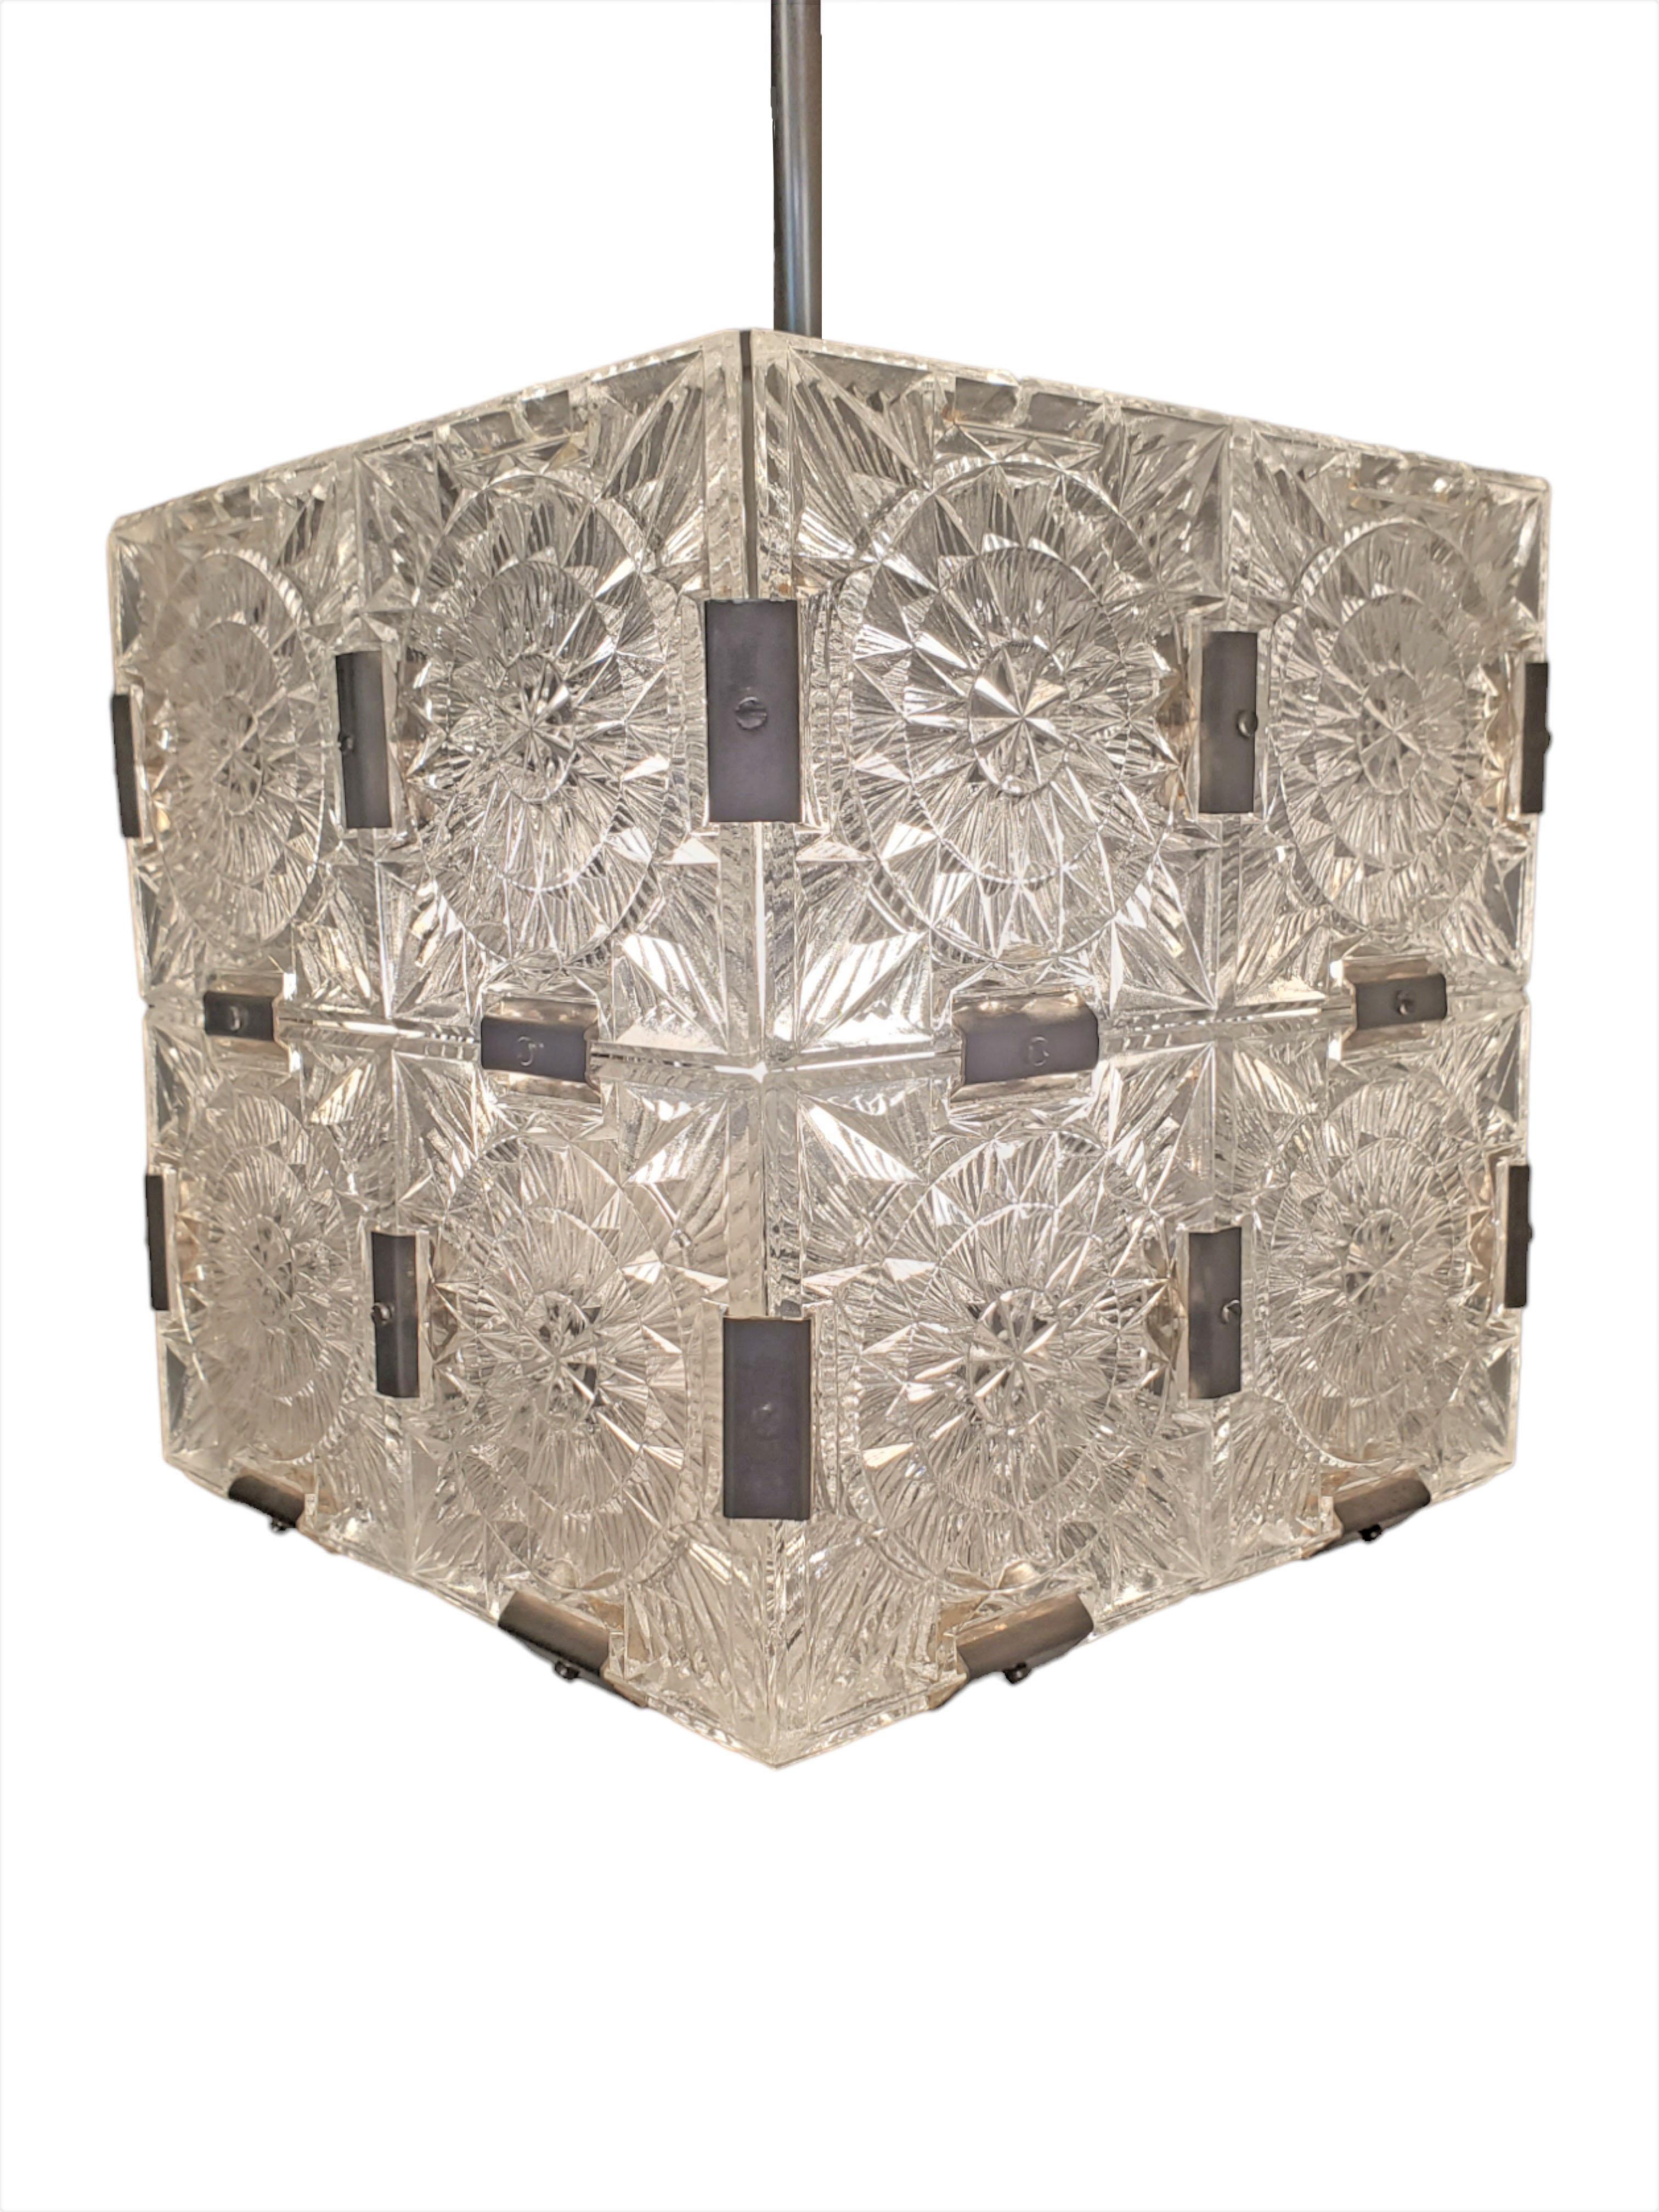 Set of Ten Original Box Cube Pendant Lights, Glass with Nickeled Clips For Sale 2